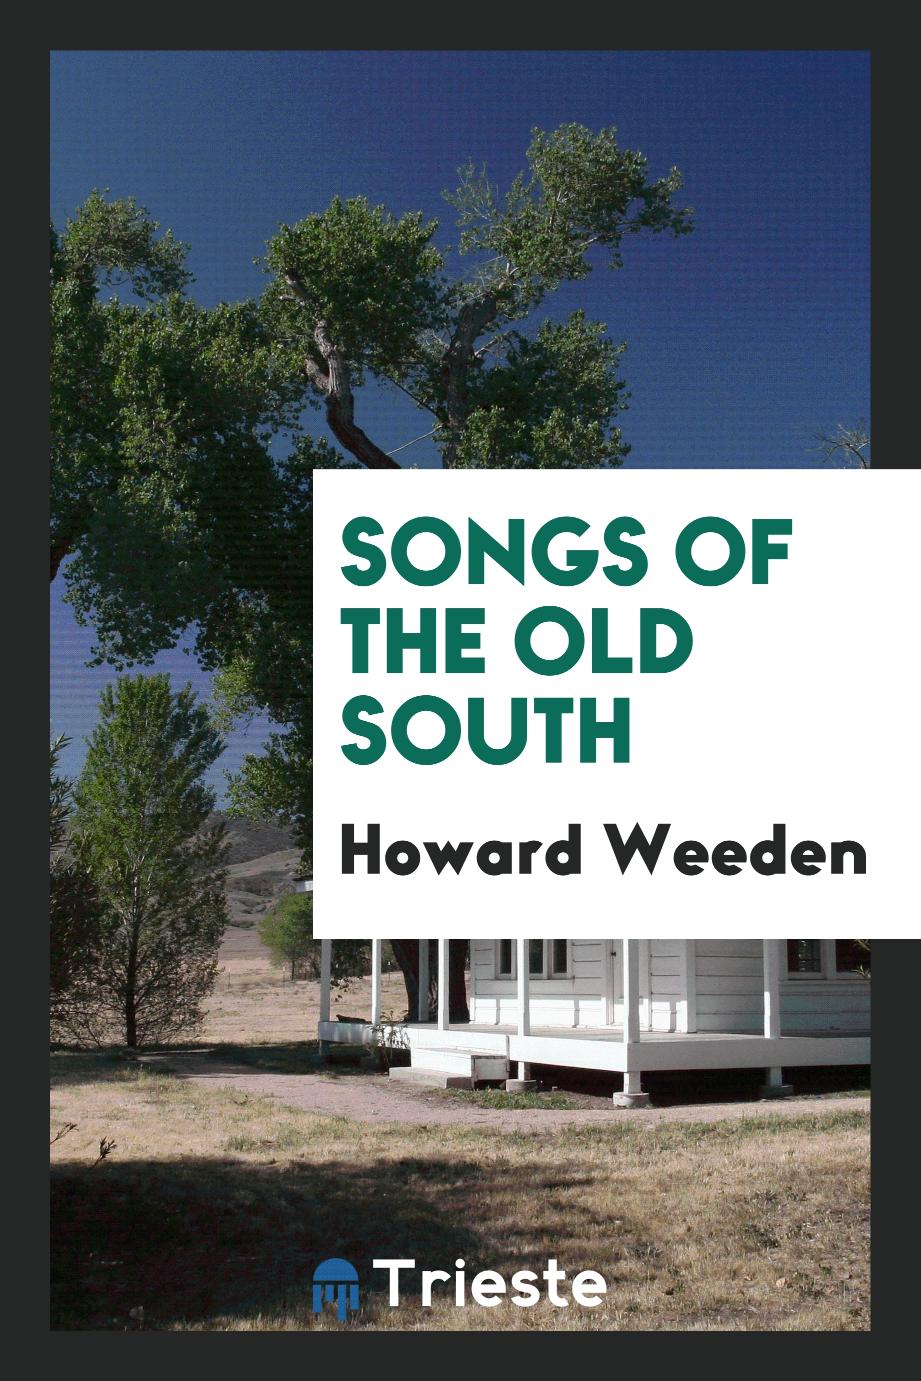 Songs of the old South